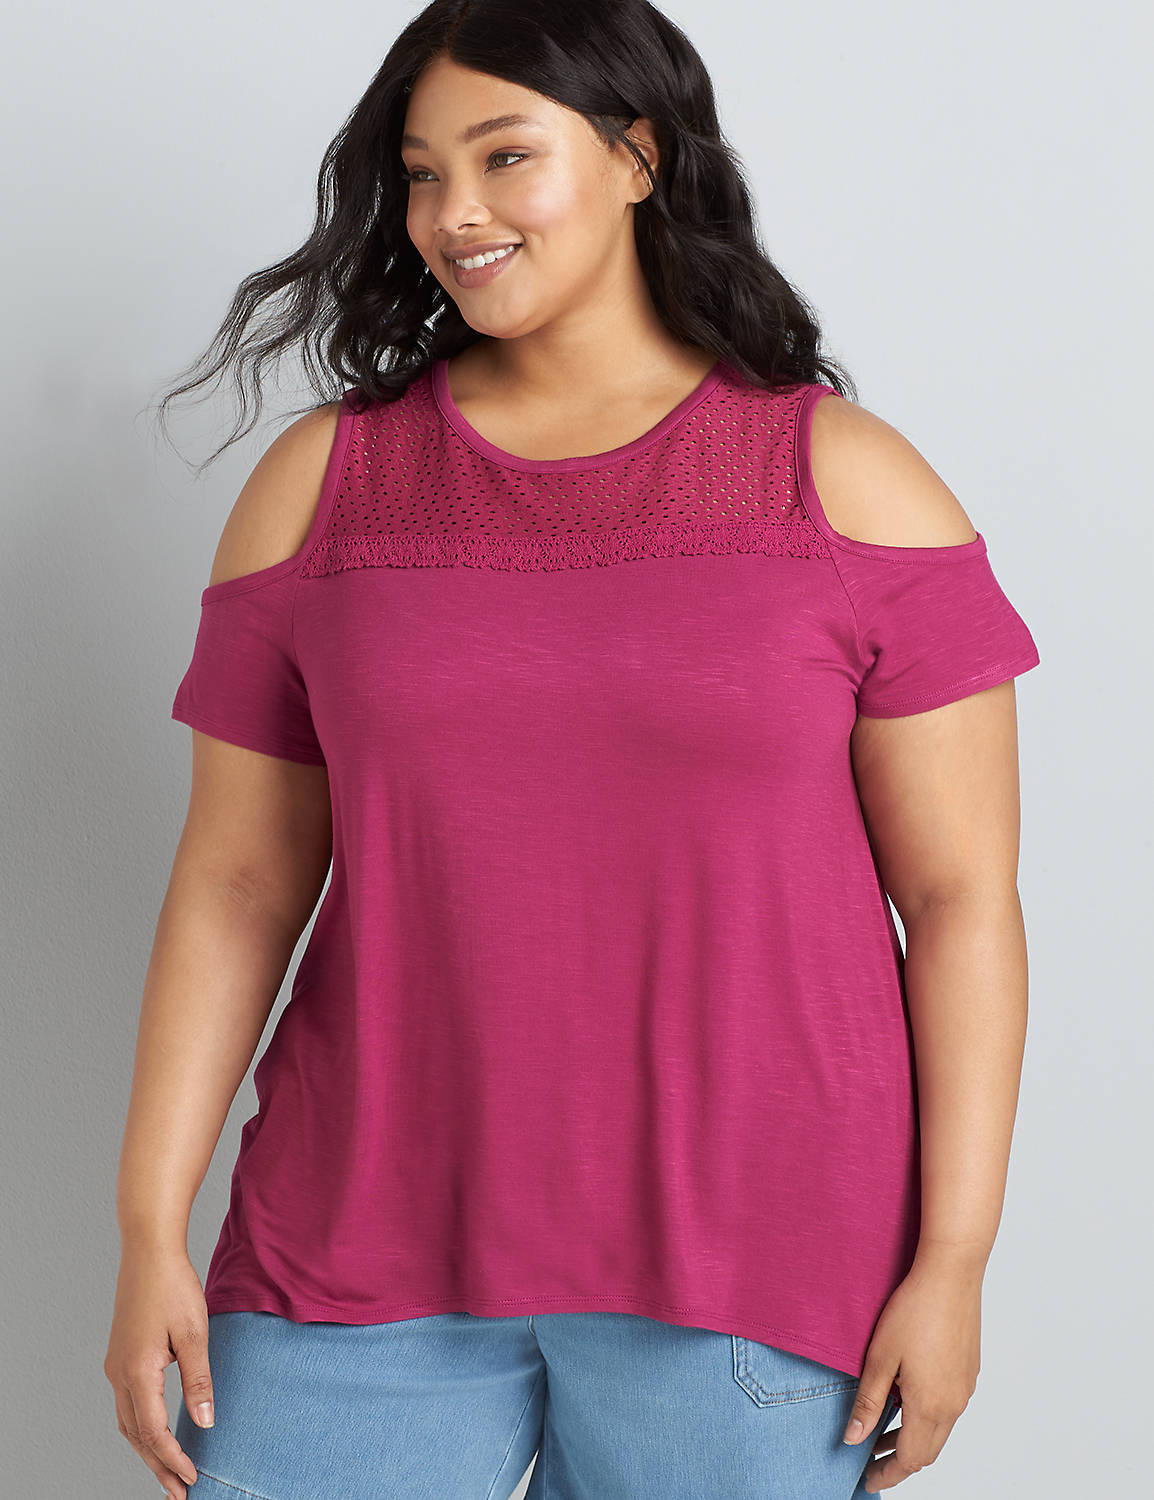 Cold-Shoulder Swing Tee with Perforated Neckline Product Image 1